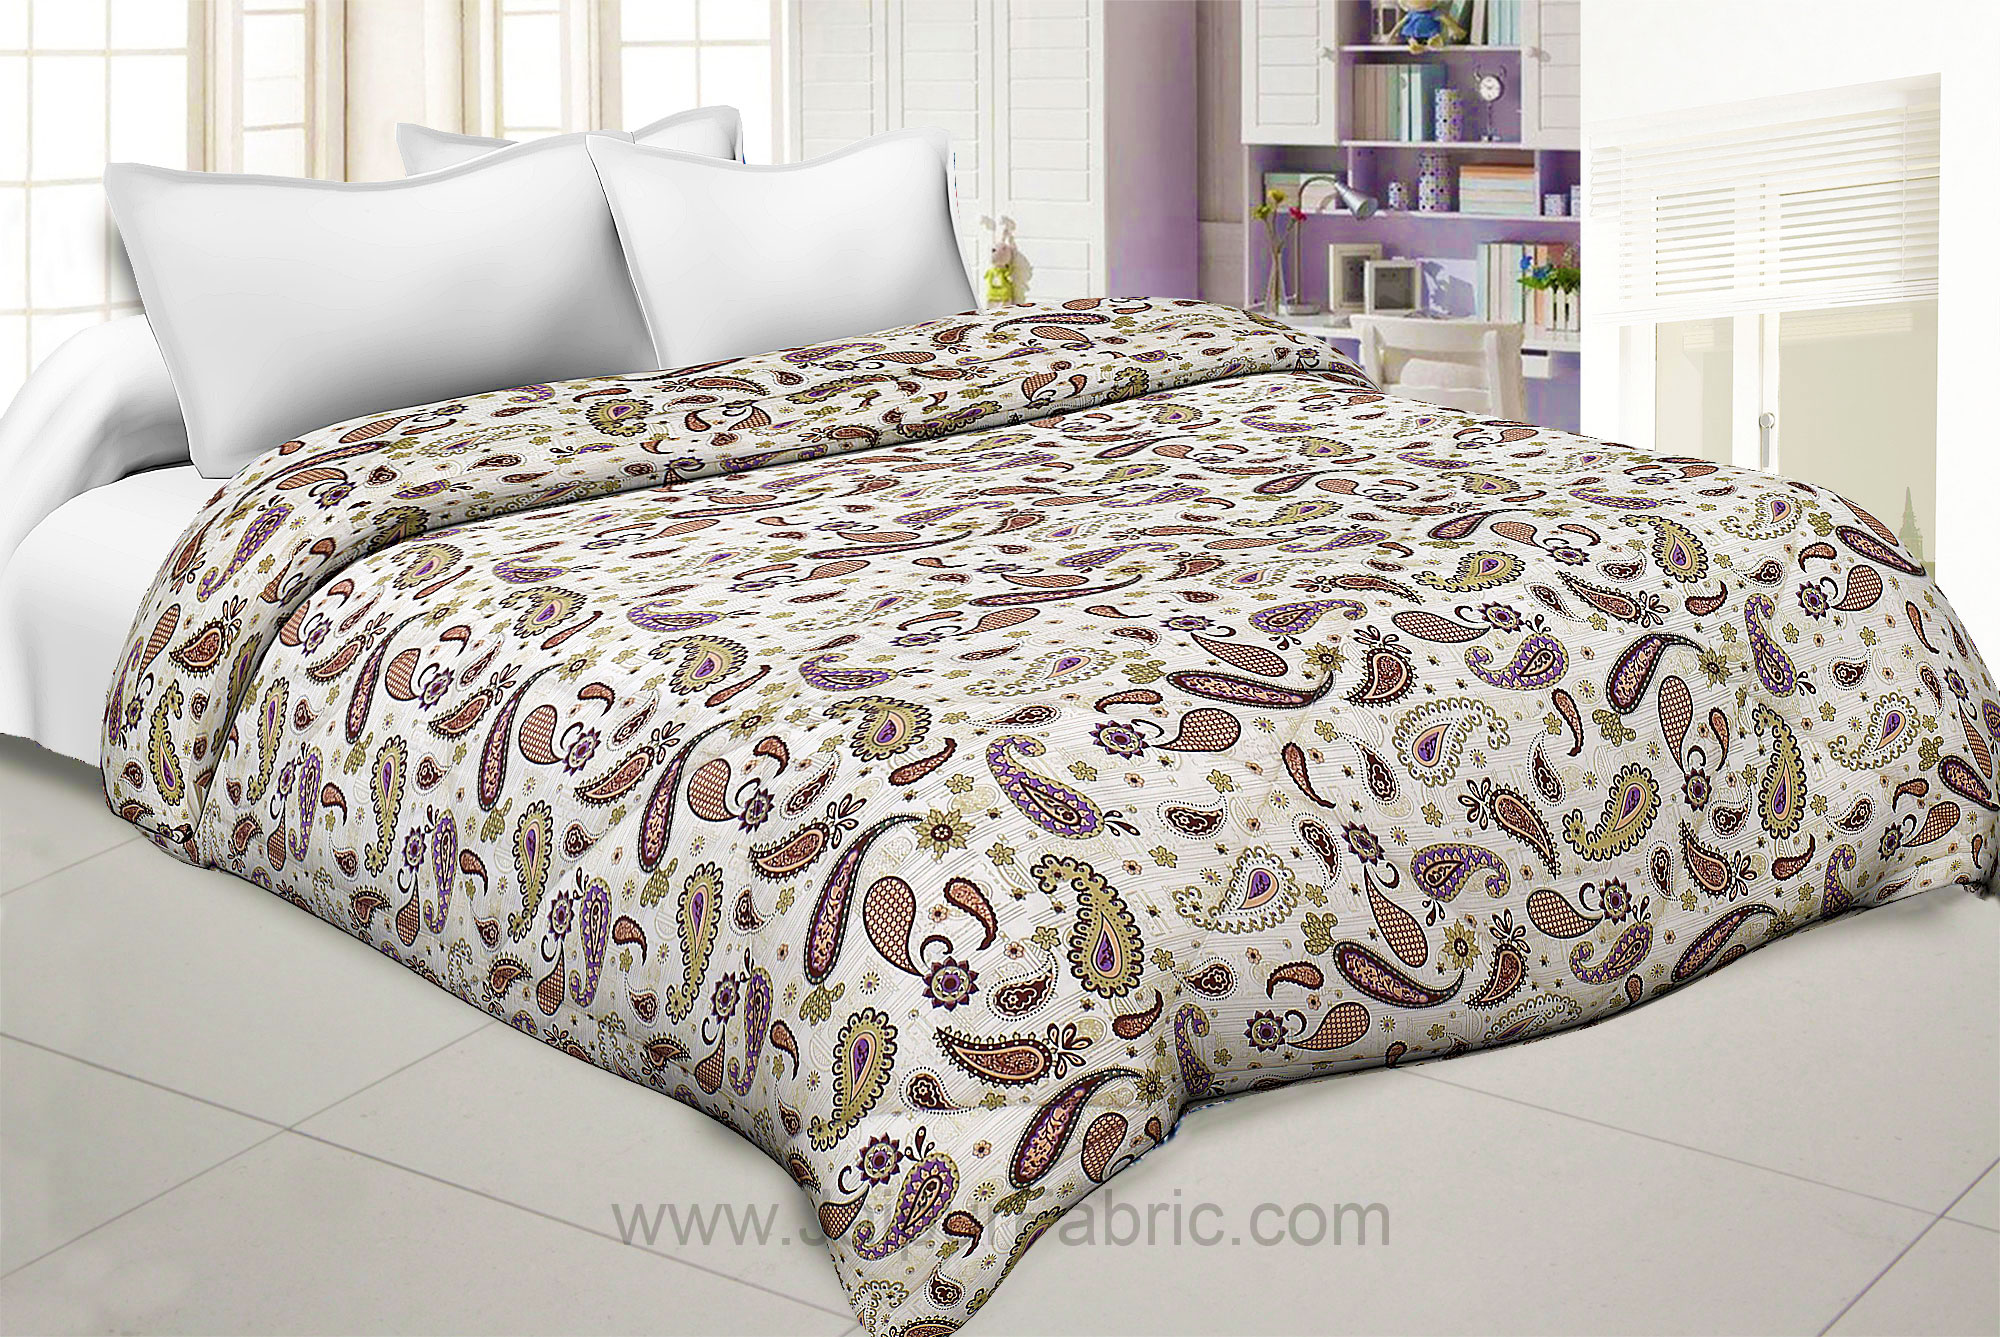 Bed in a Bag Paisley Creamish Pink Double BedSheet Comforter Combo